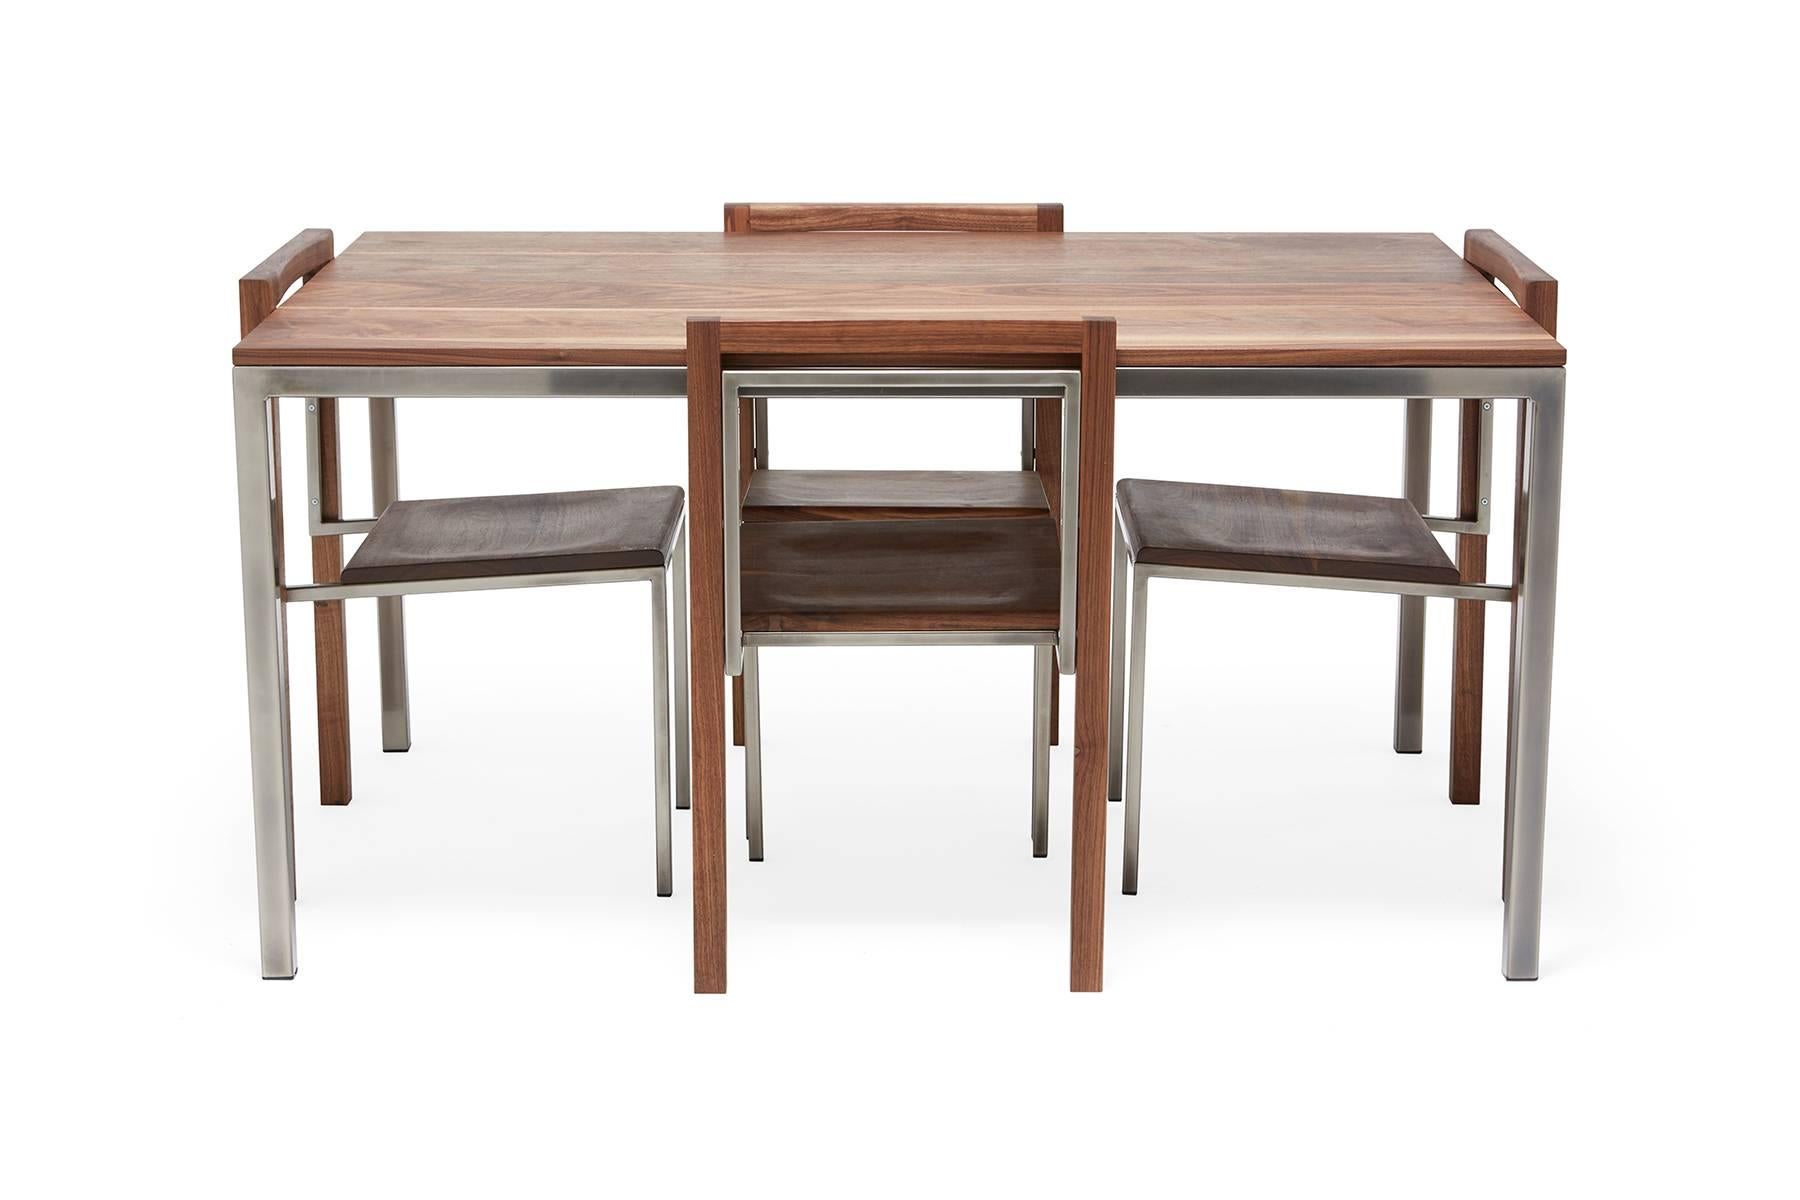 Dining goods are one of the newest additions to Stephen Kenn's The Inheritance collection. A solid walnut and steel dining table with simple and modern lines, with a set of four matching chairs.

This item is made to order in Los